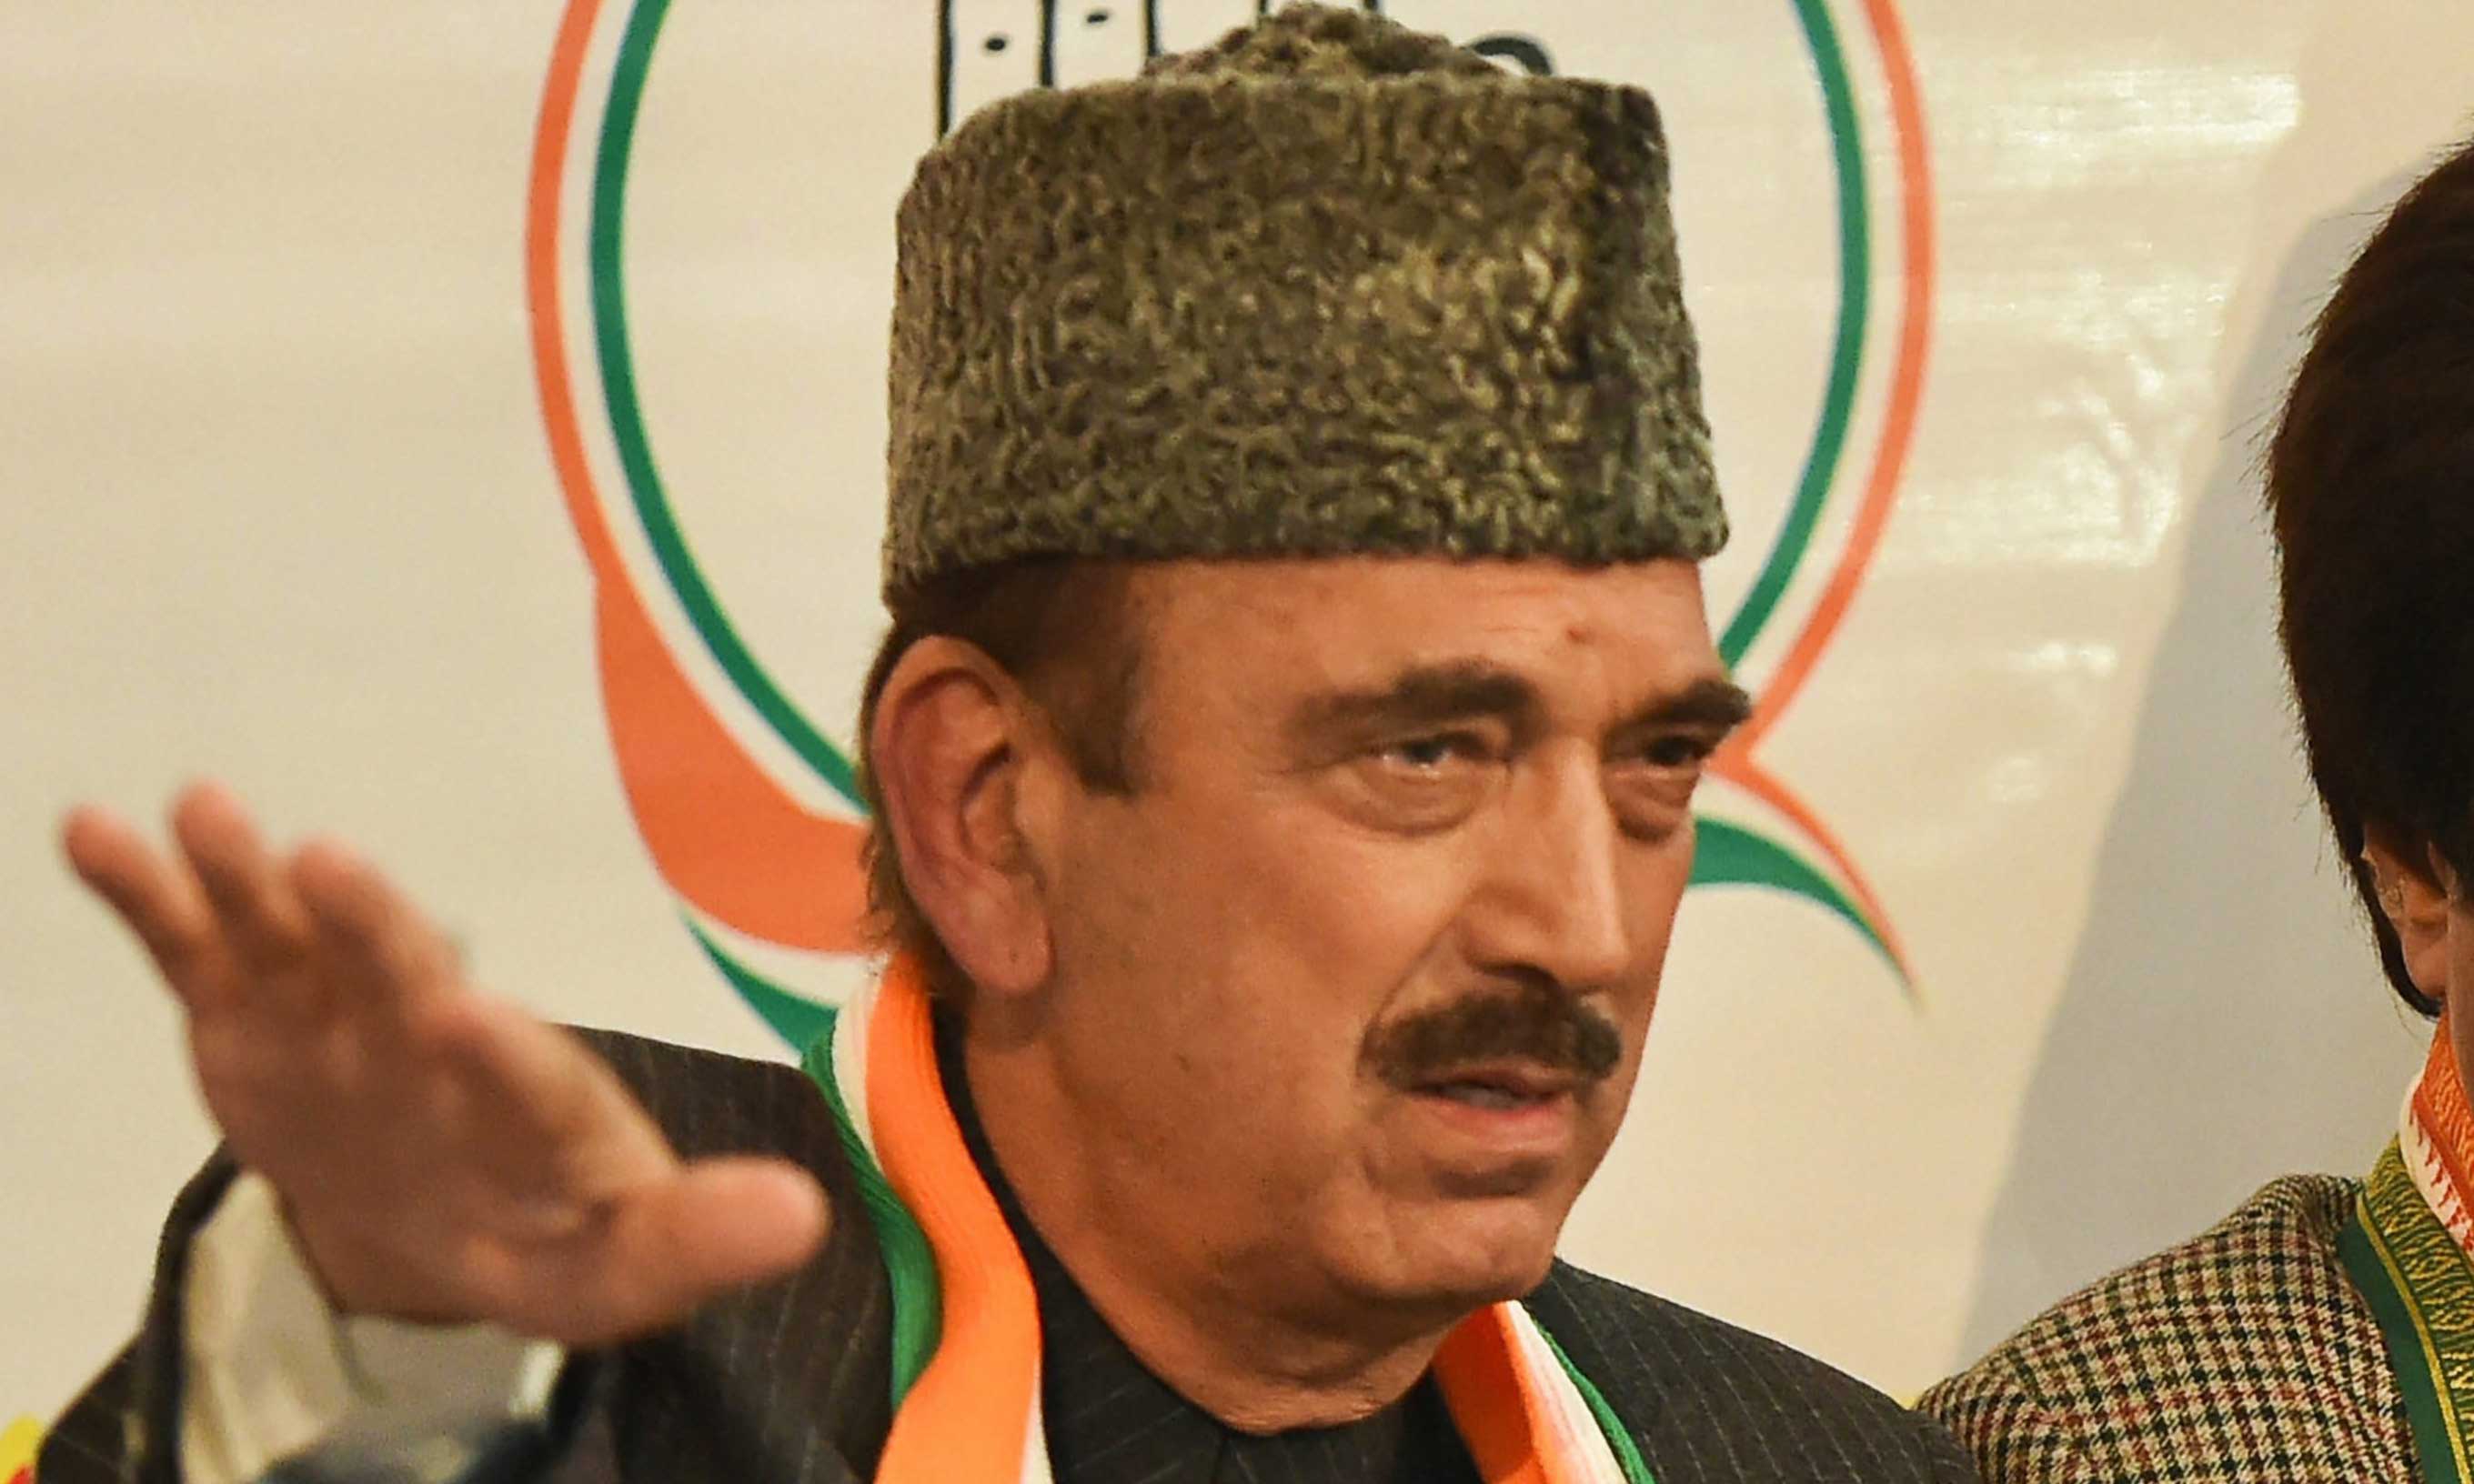 Former Union health minister Ghulam Nabi Azad made the appeal at an all-party meeting chaired by the Prime Minister. Azad also sought implementation of suggestions Congress president Sonia Gandhi has made.